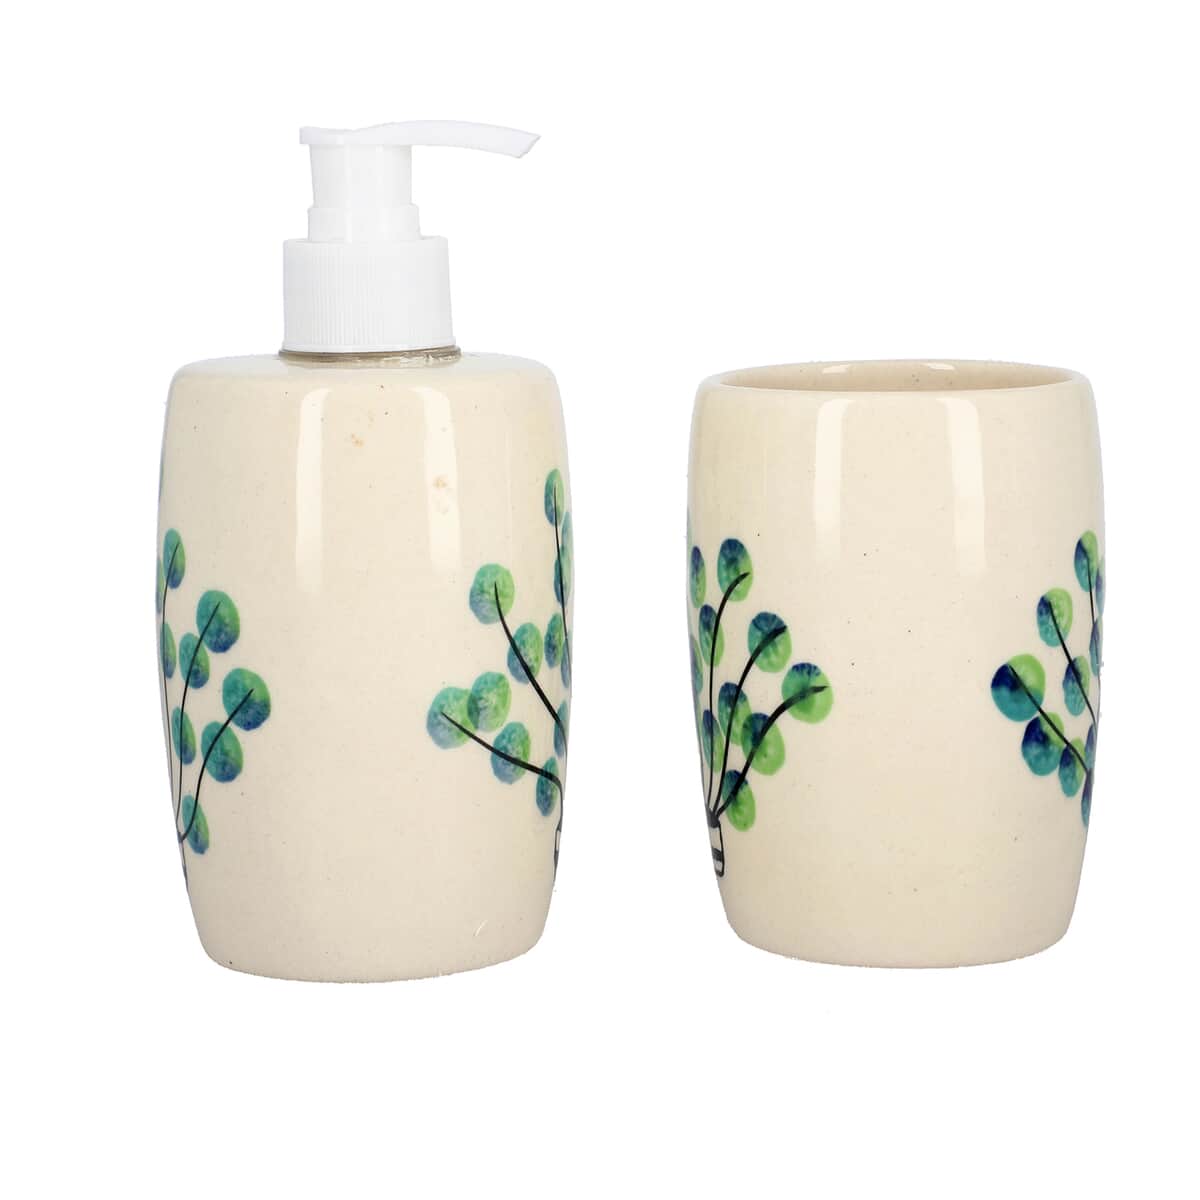 Set of 3 Ceramic Bathroom Accessory Liquid Soap Dispenser, Soap Tray & Tumbler - Green and White image number 6